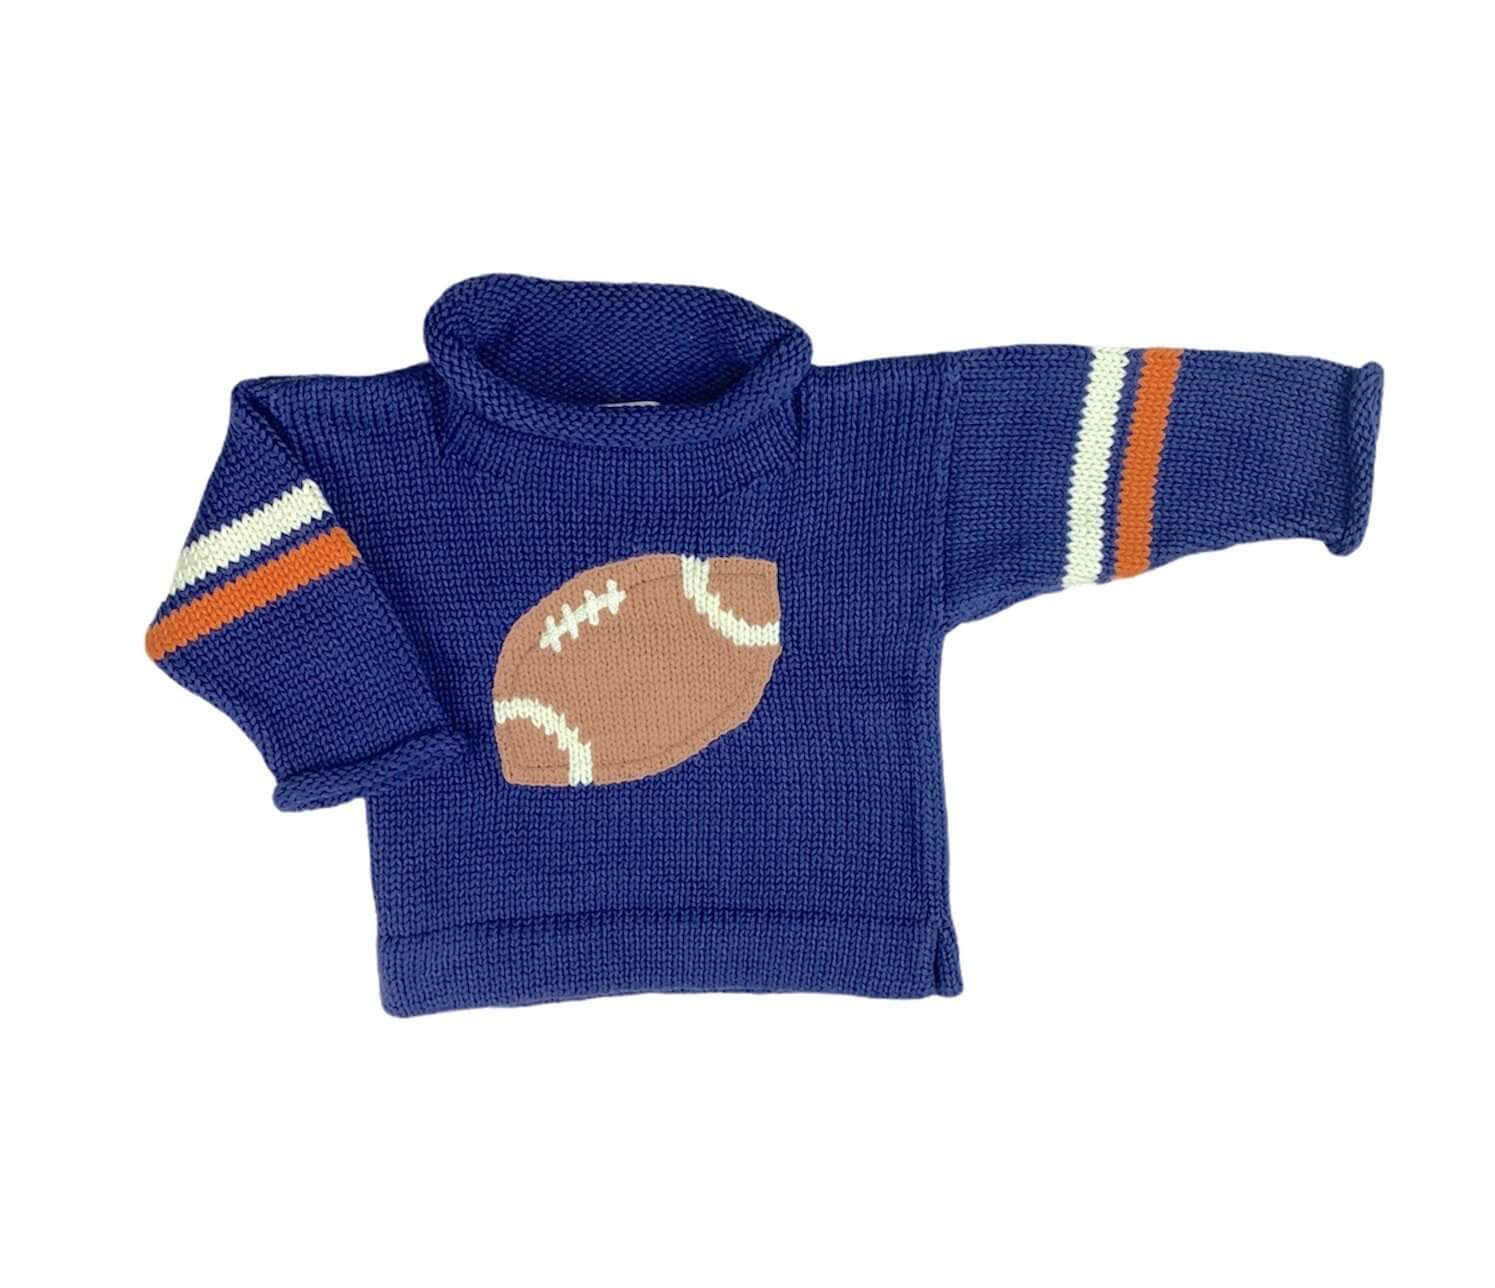 navy roll neck sweater with orange and white stripes, 2 stripes on each sleeve, brown and white football in center